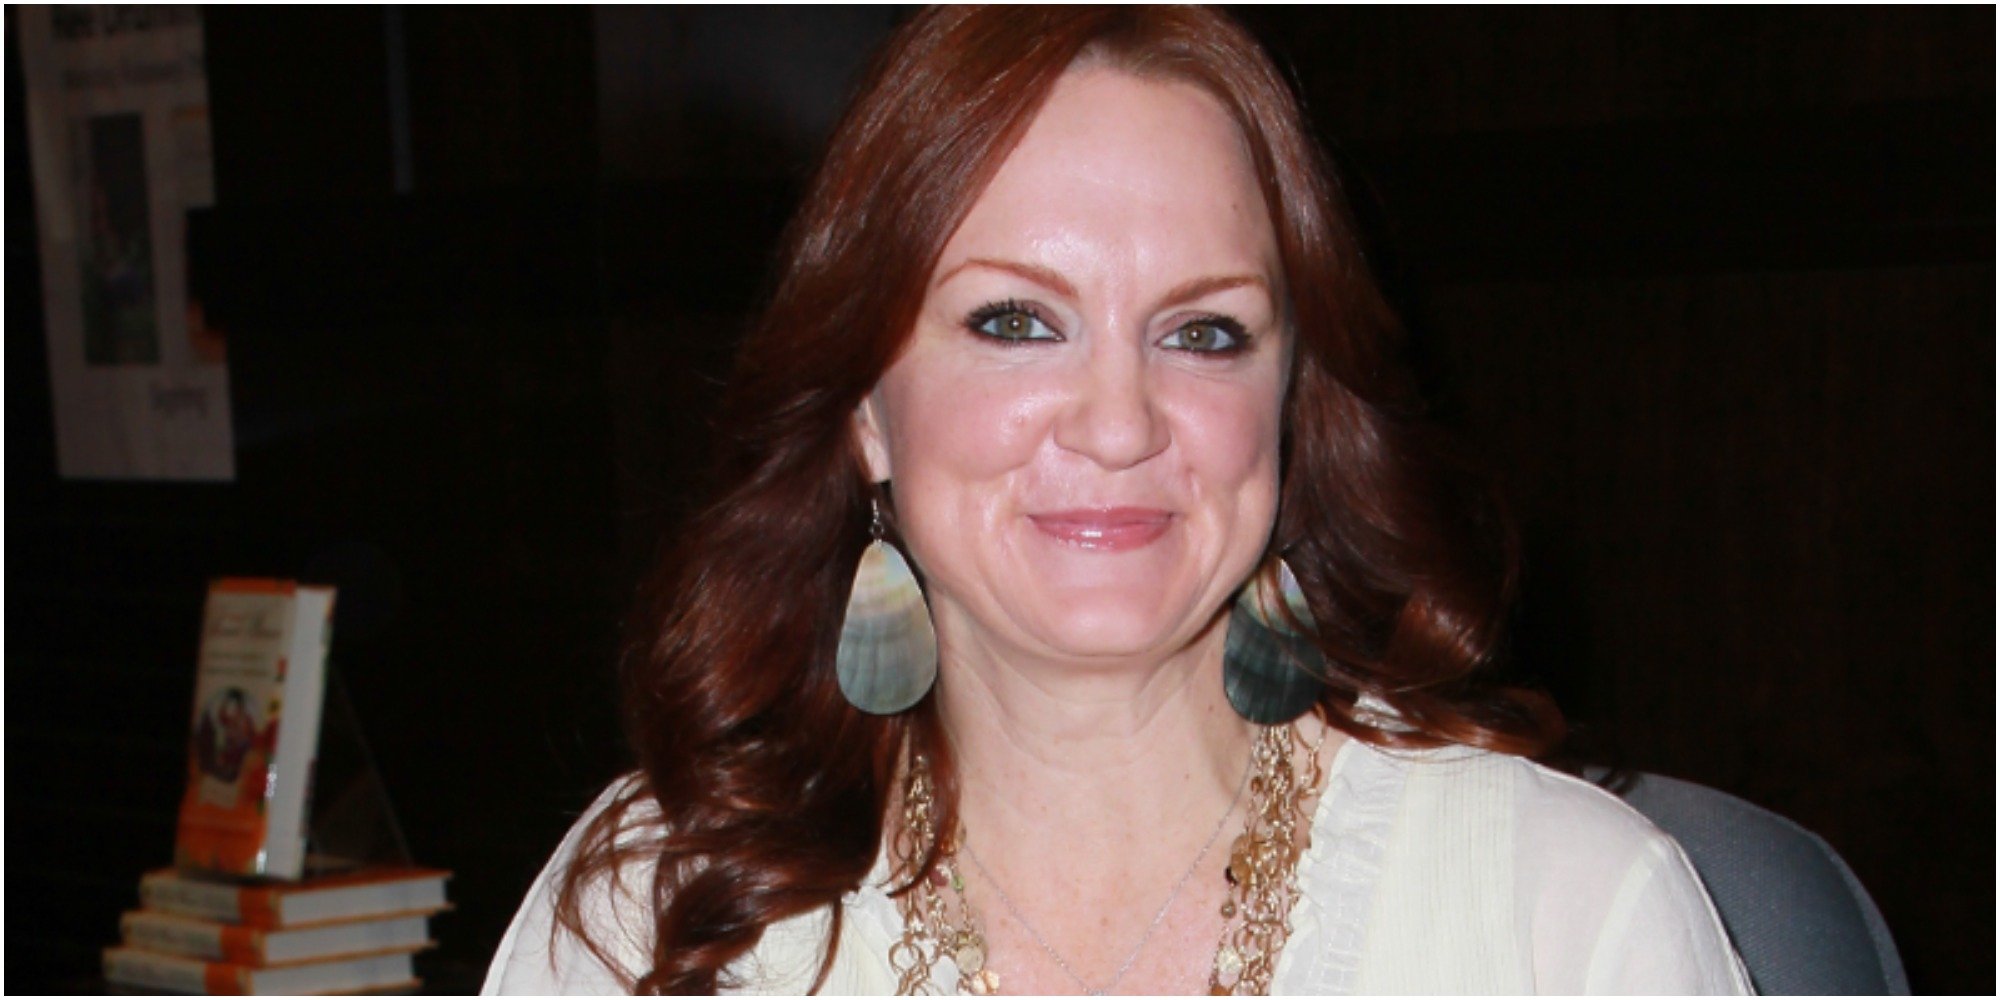 Ree Drummond wars a white shirt in a press photograph.